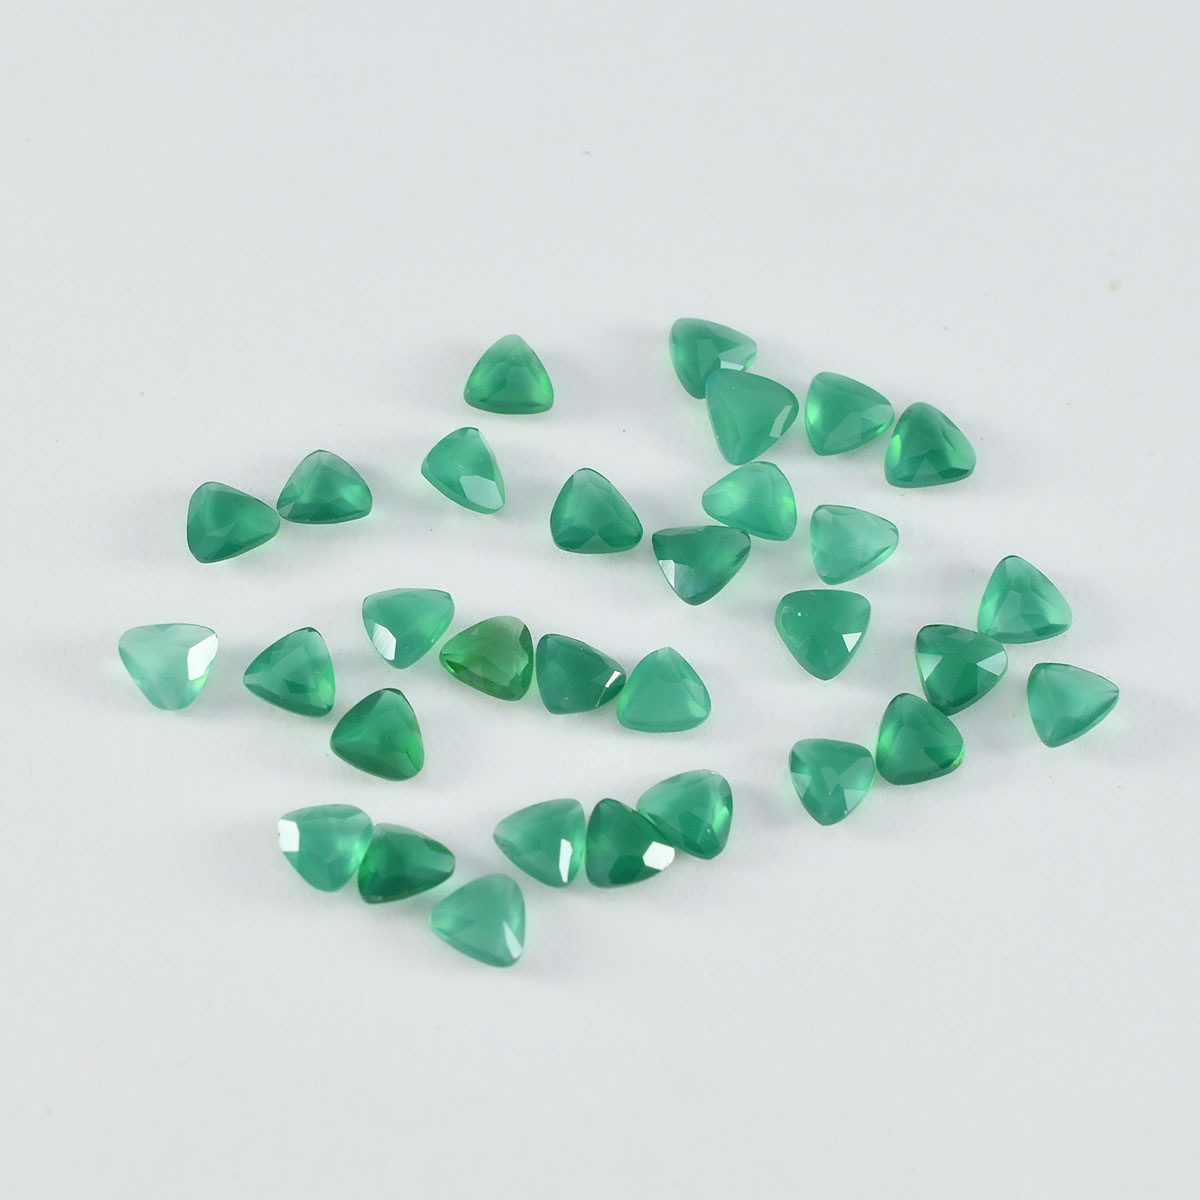 Riyogems 1PC Real Green Onyx Faceted 4X4 mm Trillion Shape handsome Quality Loose Gems